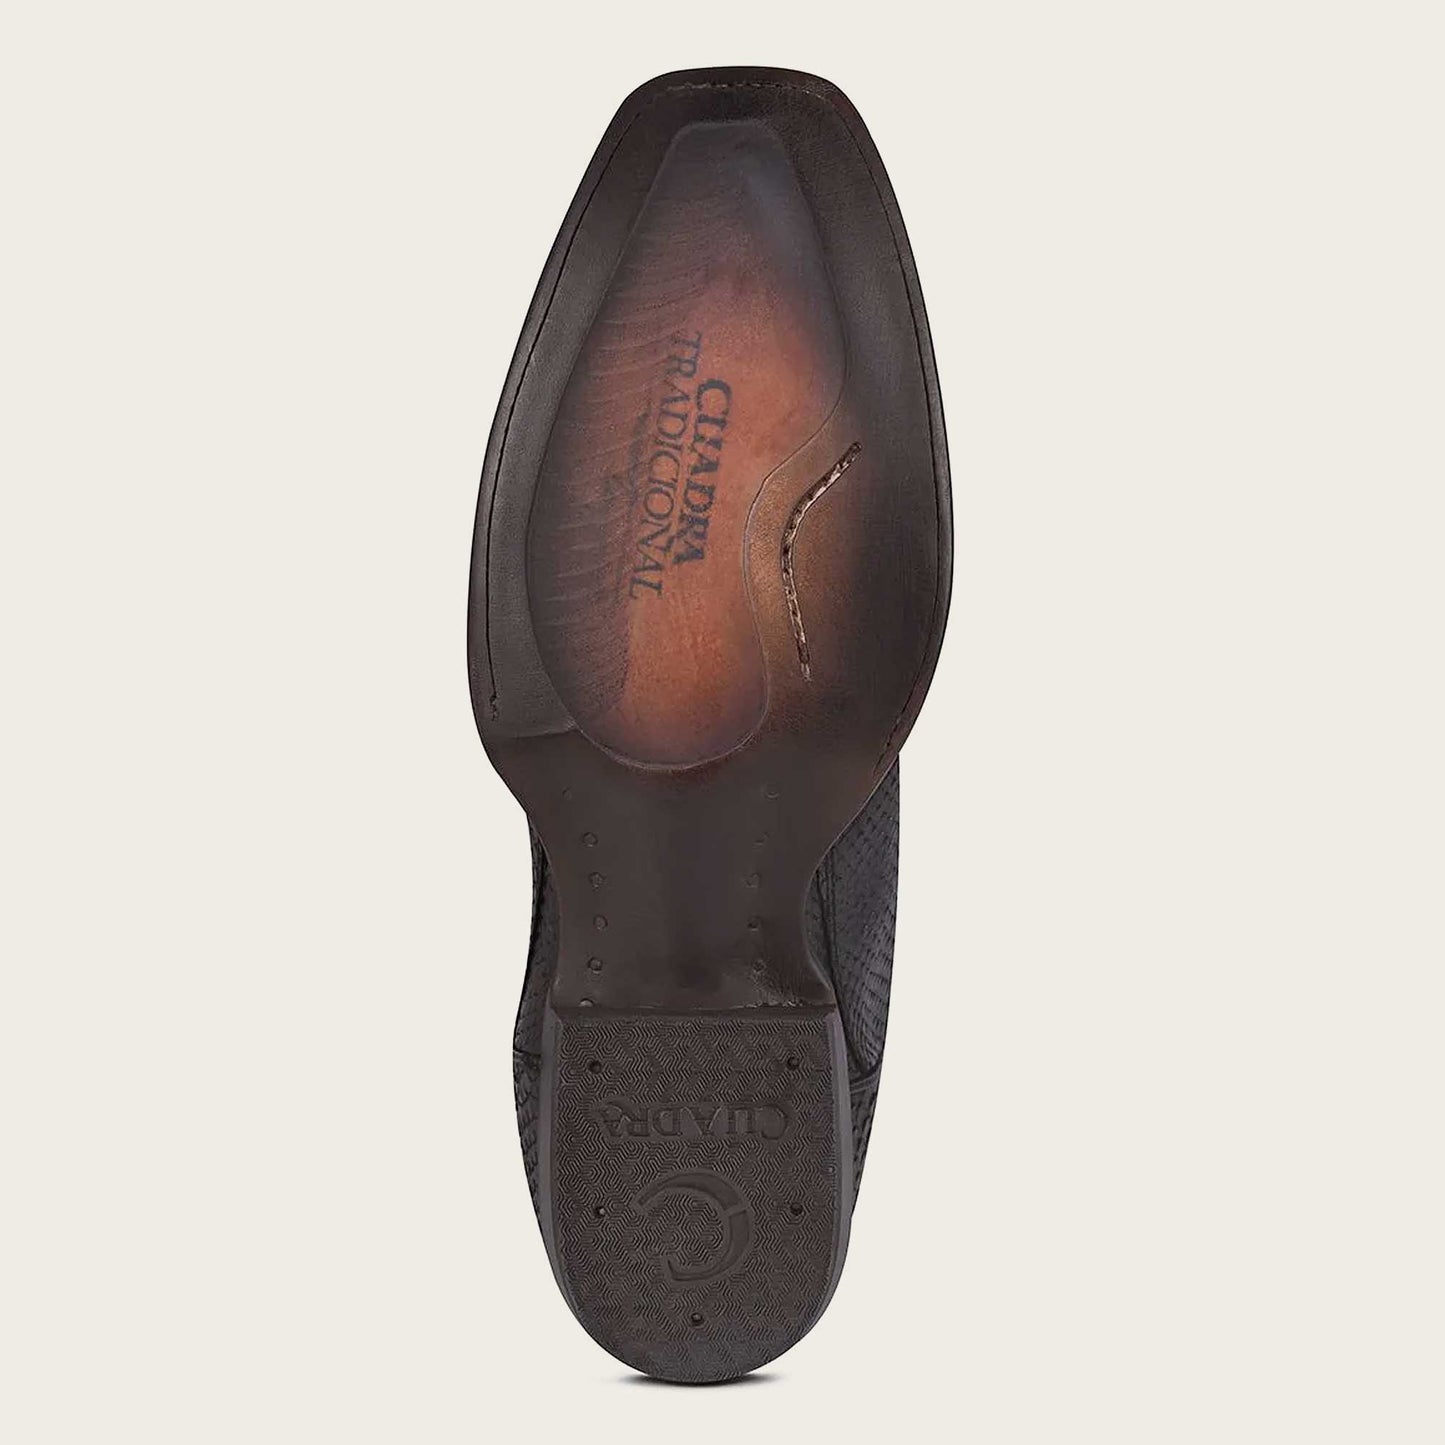 Durable and comfortable, the leather sole has TPU injection reinforcement and a removable insole for convenience.